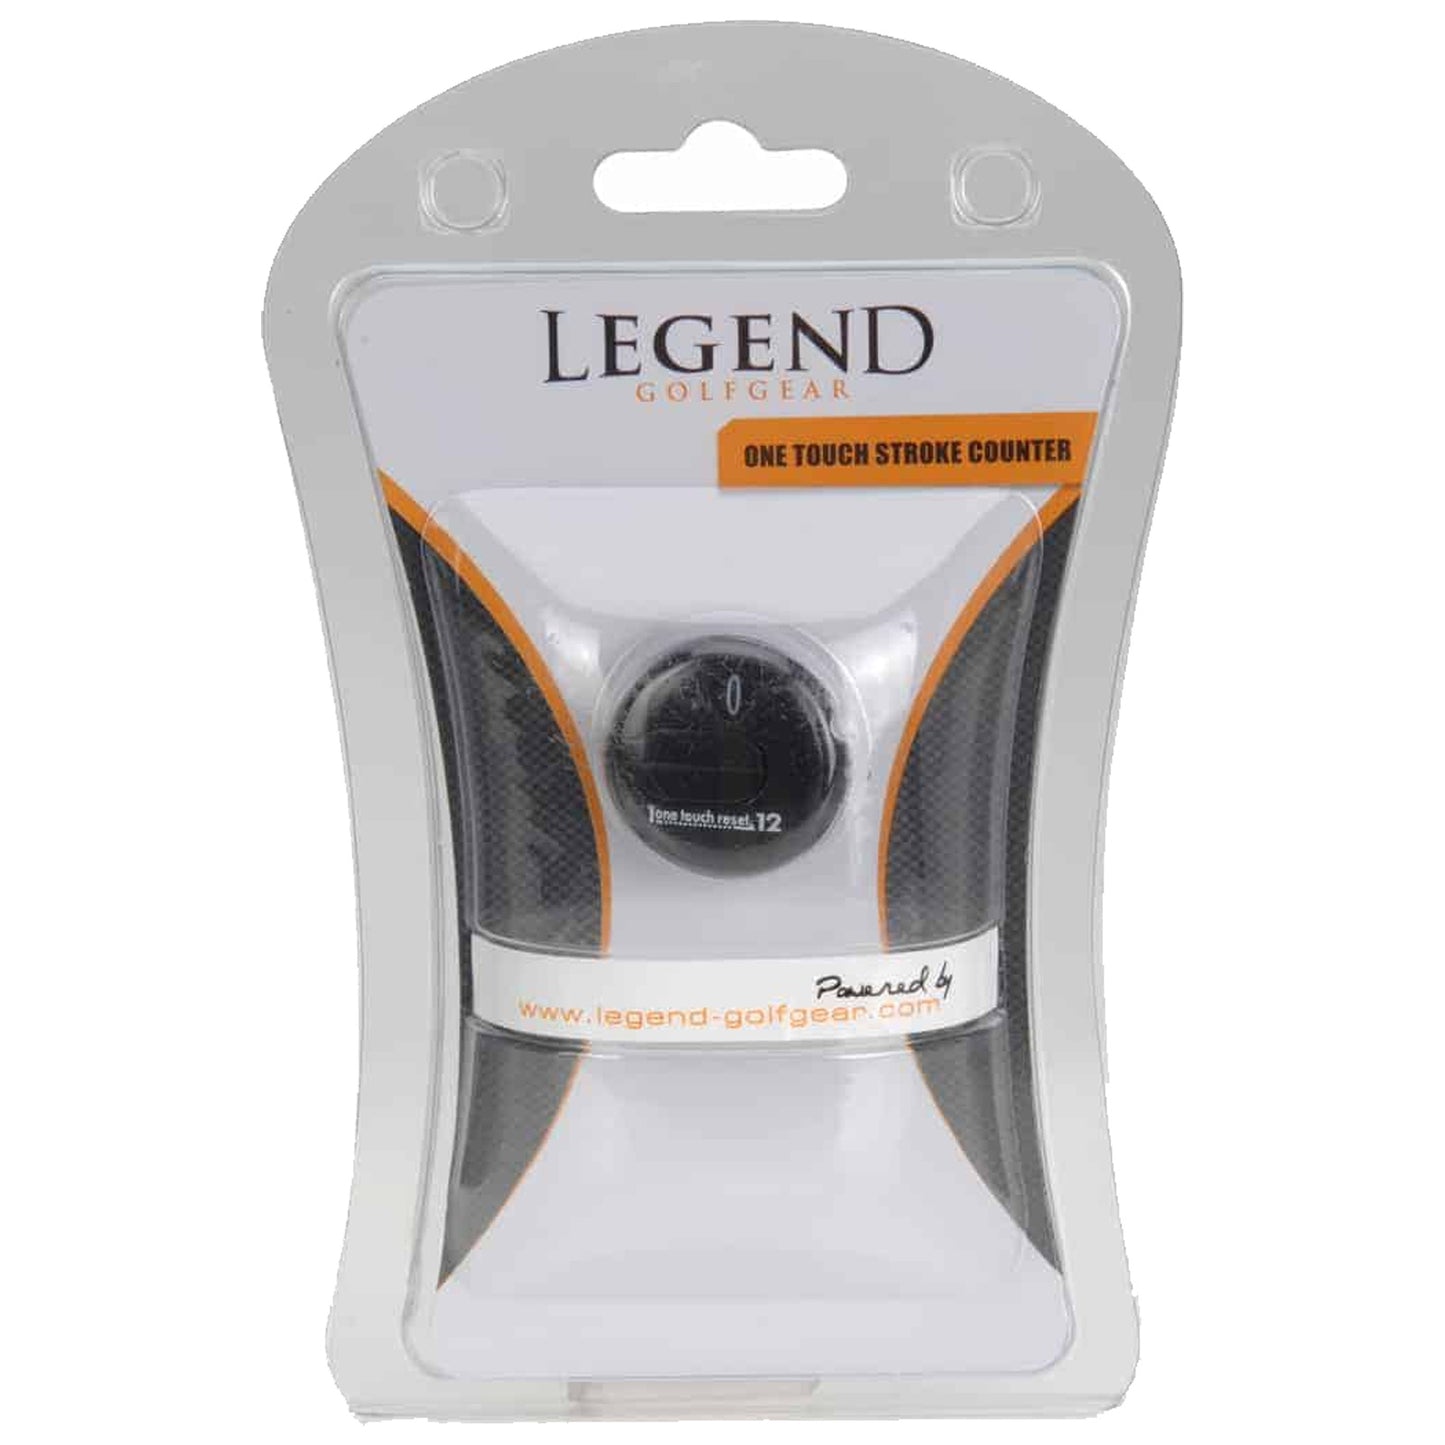 Legend OneTouch Stroke Counter